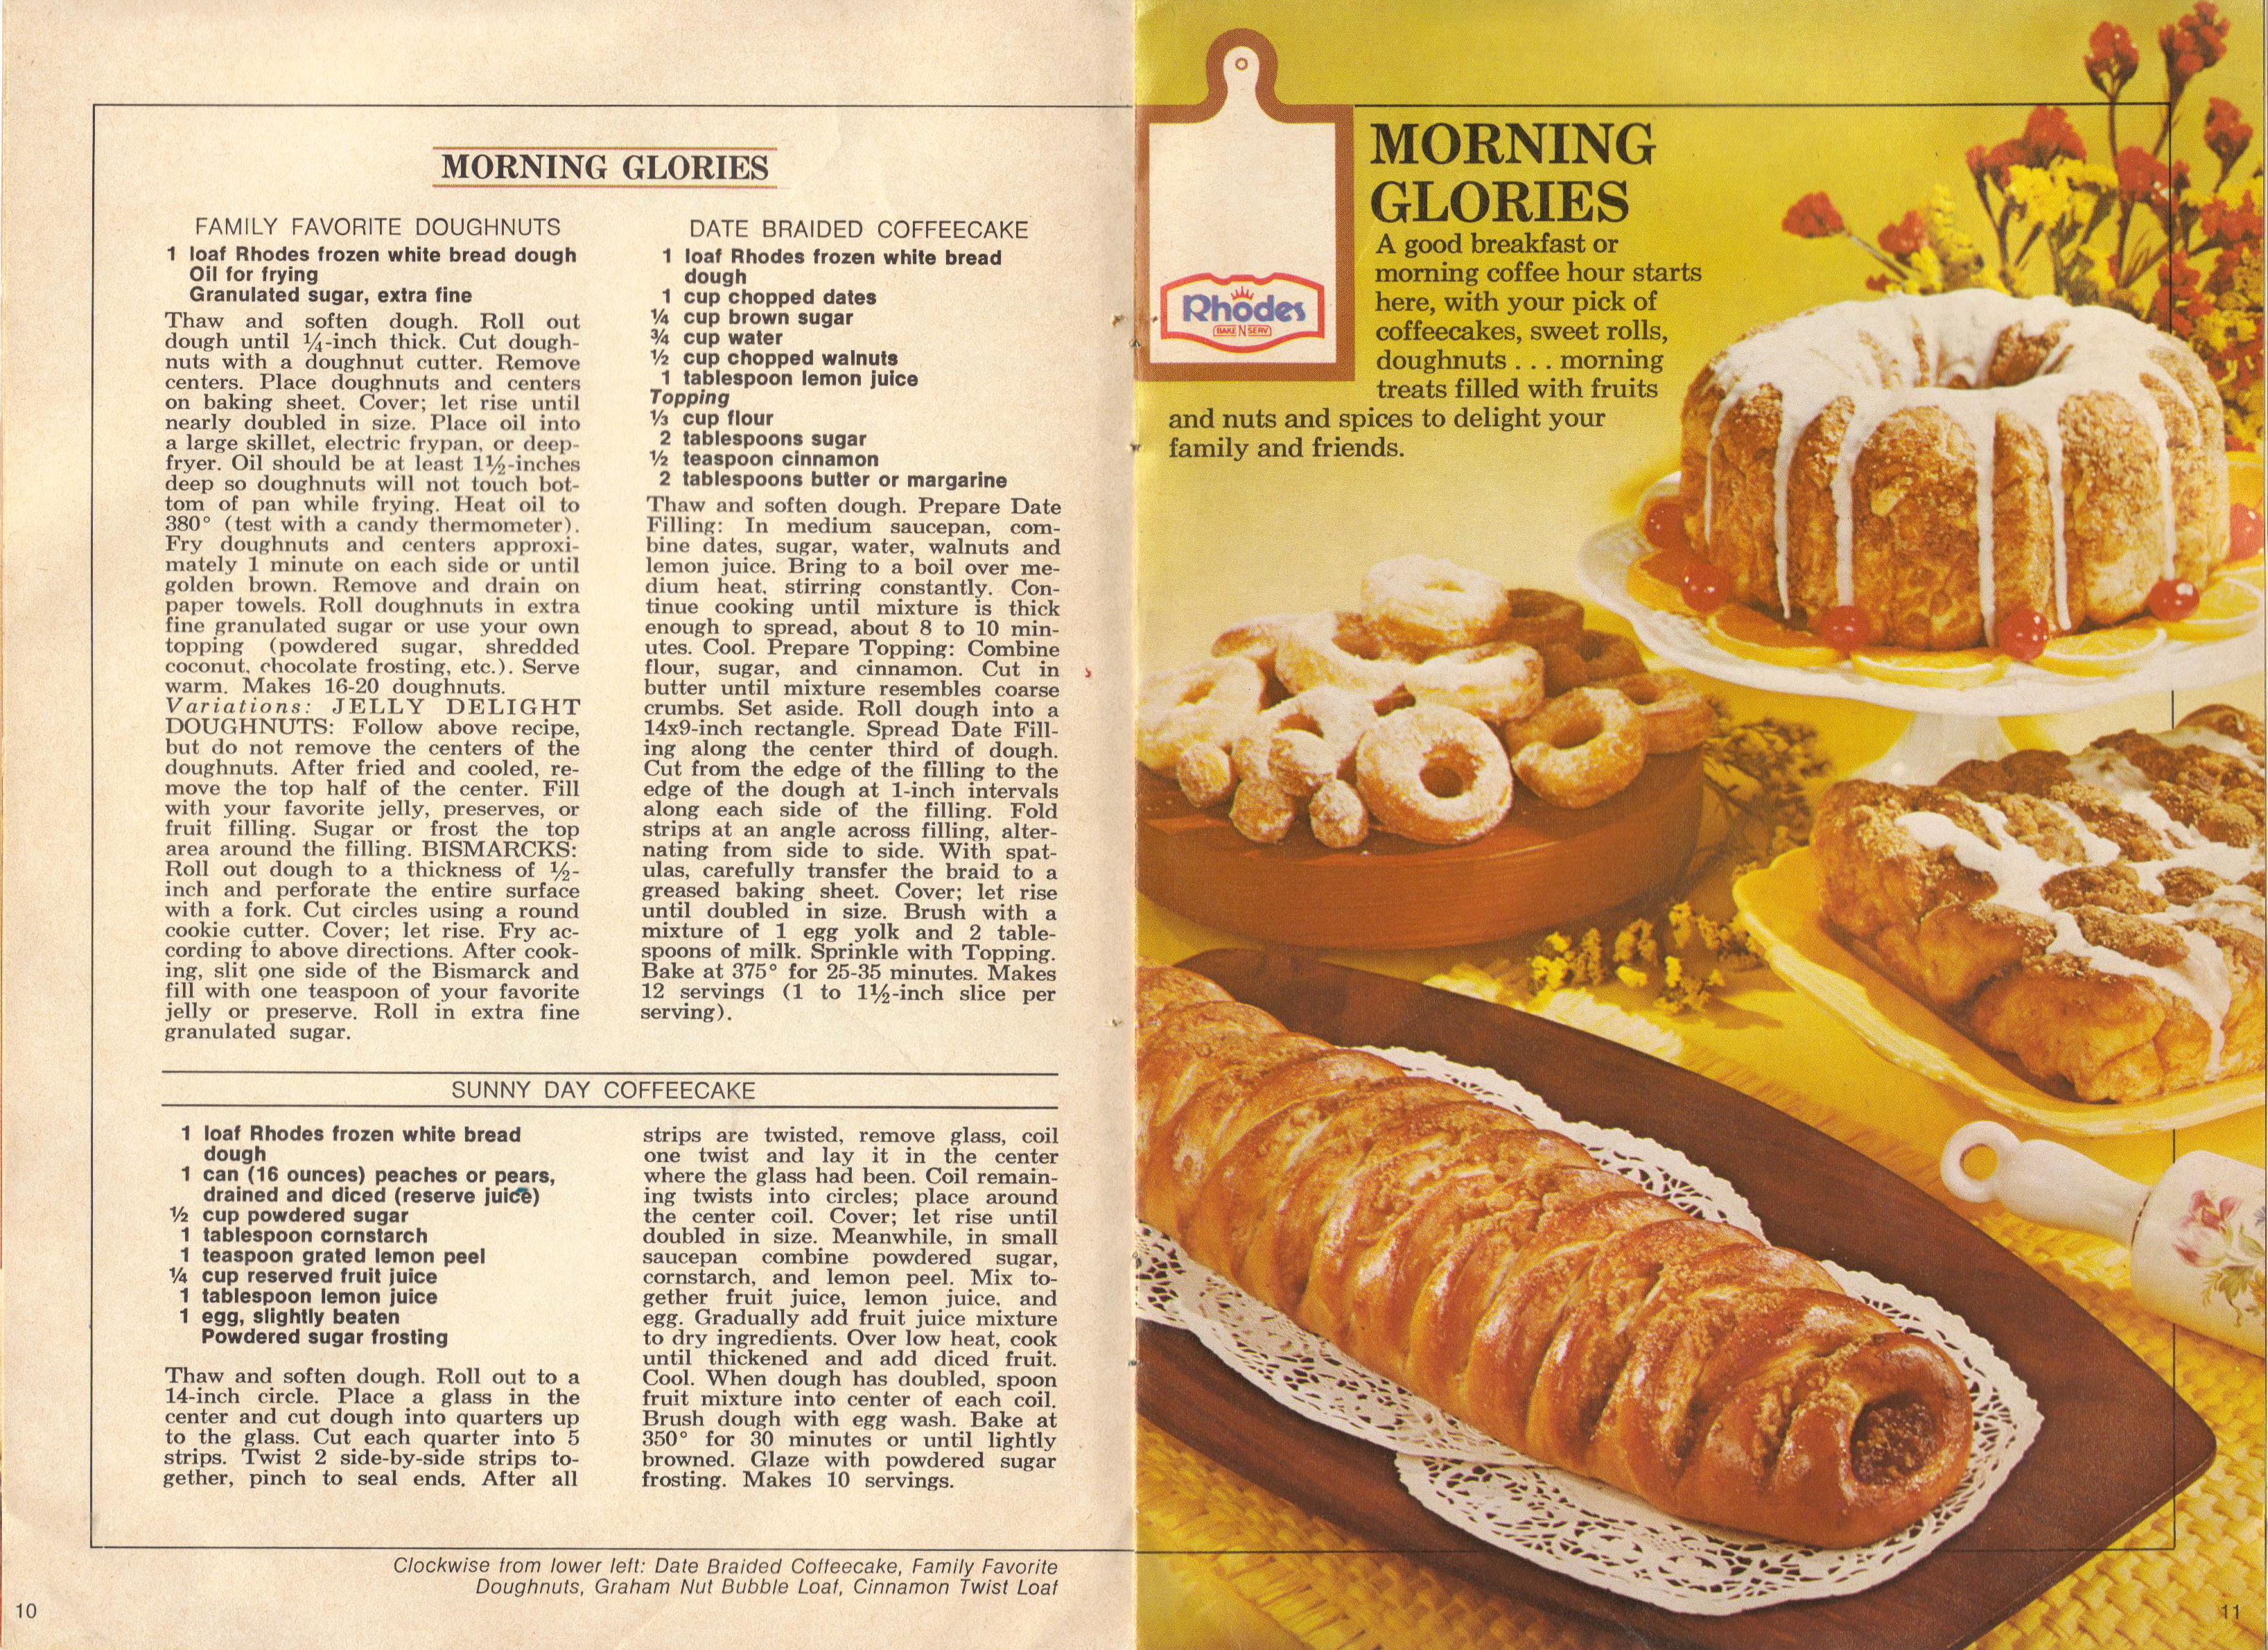 Vintage Coffeecake Sweet Rolls And Doughnuts Recipes,Types Of Onions And Their Benefits